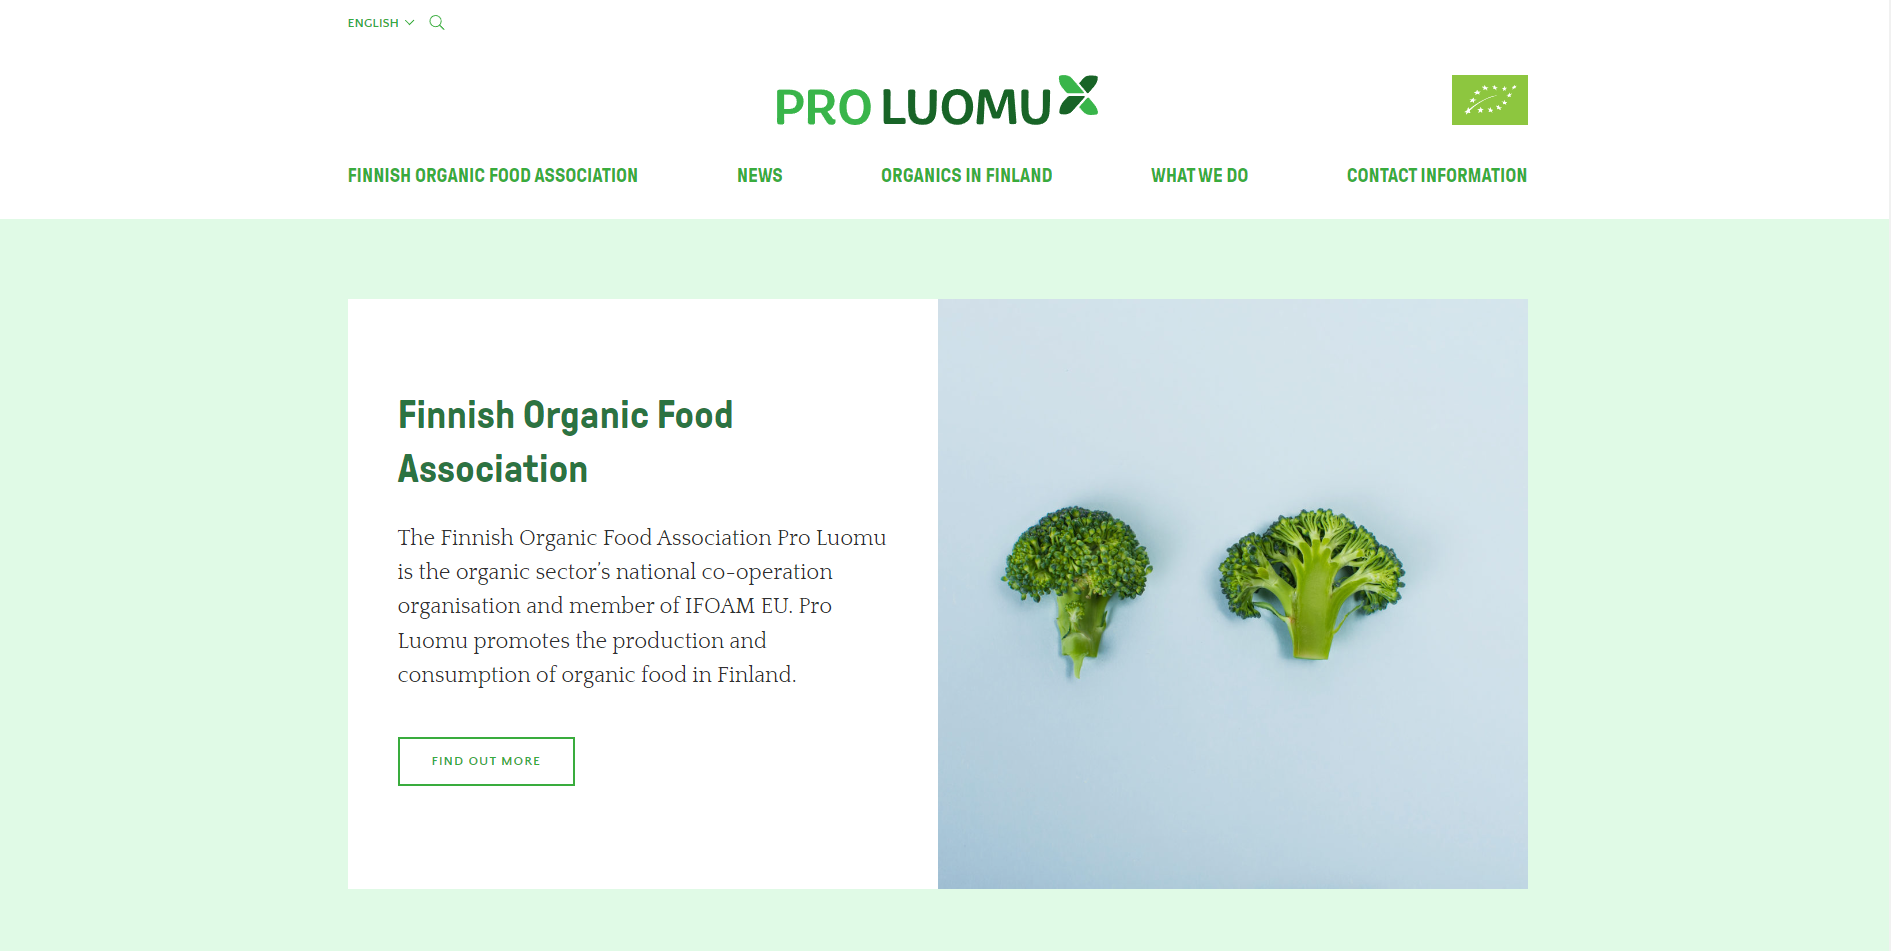 Pro Luomu - Organic Food Association in Finland